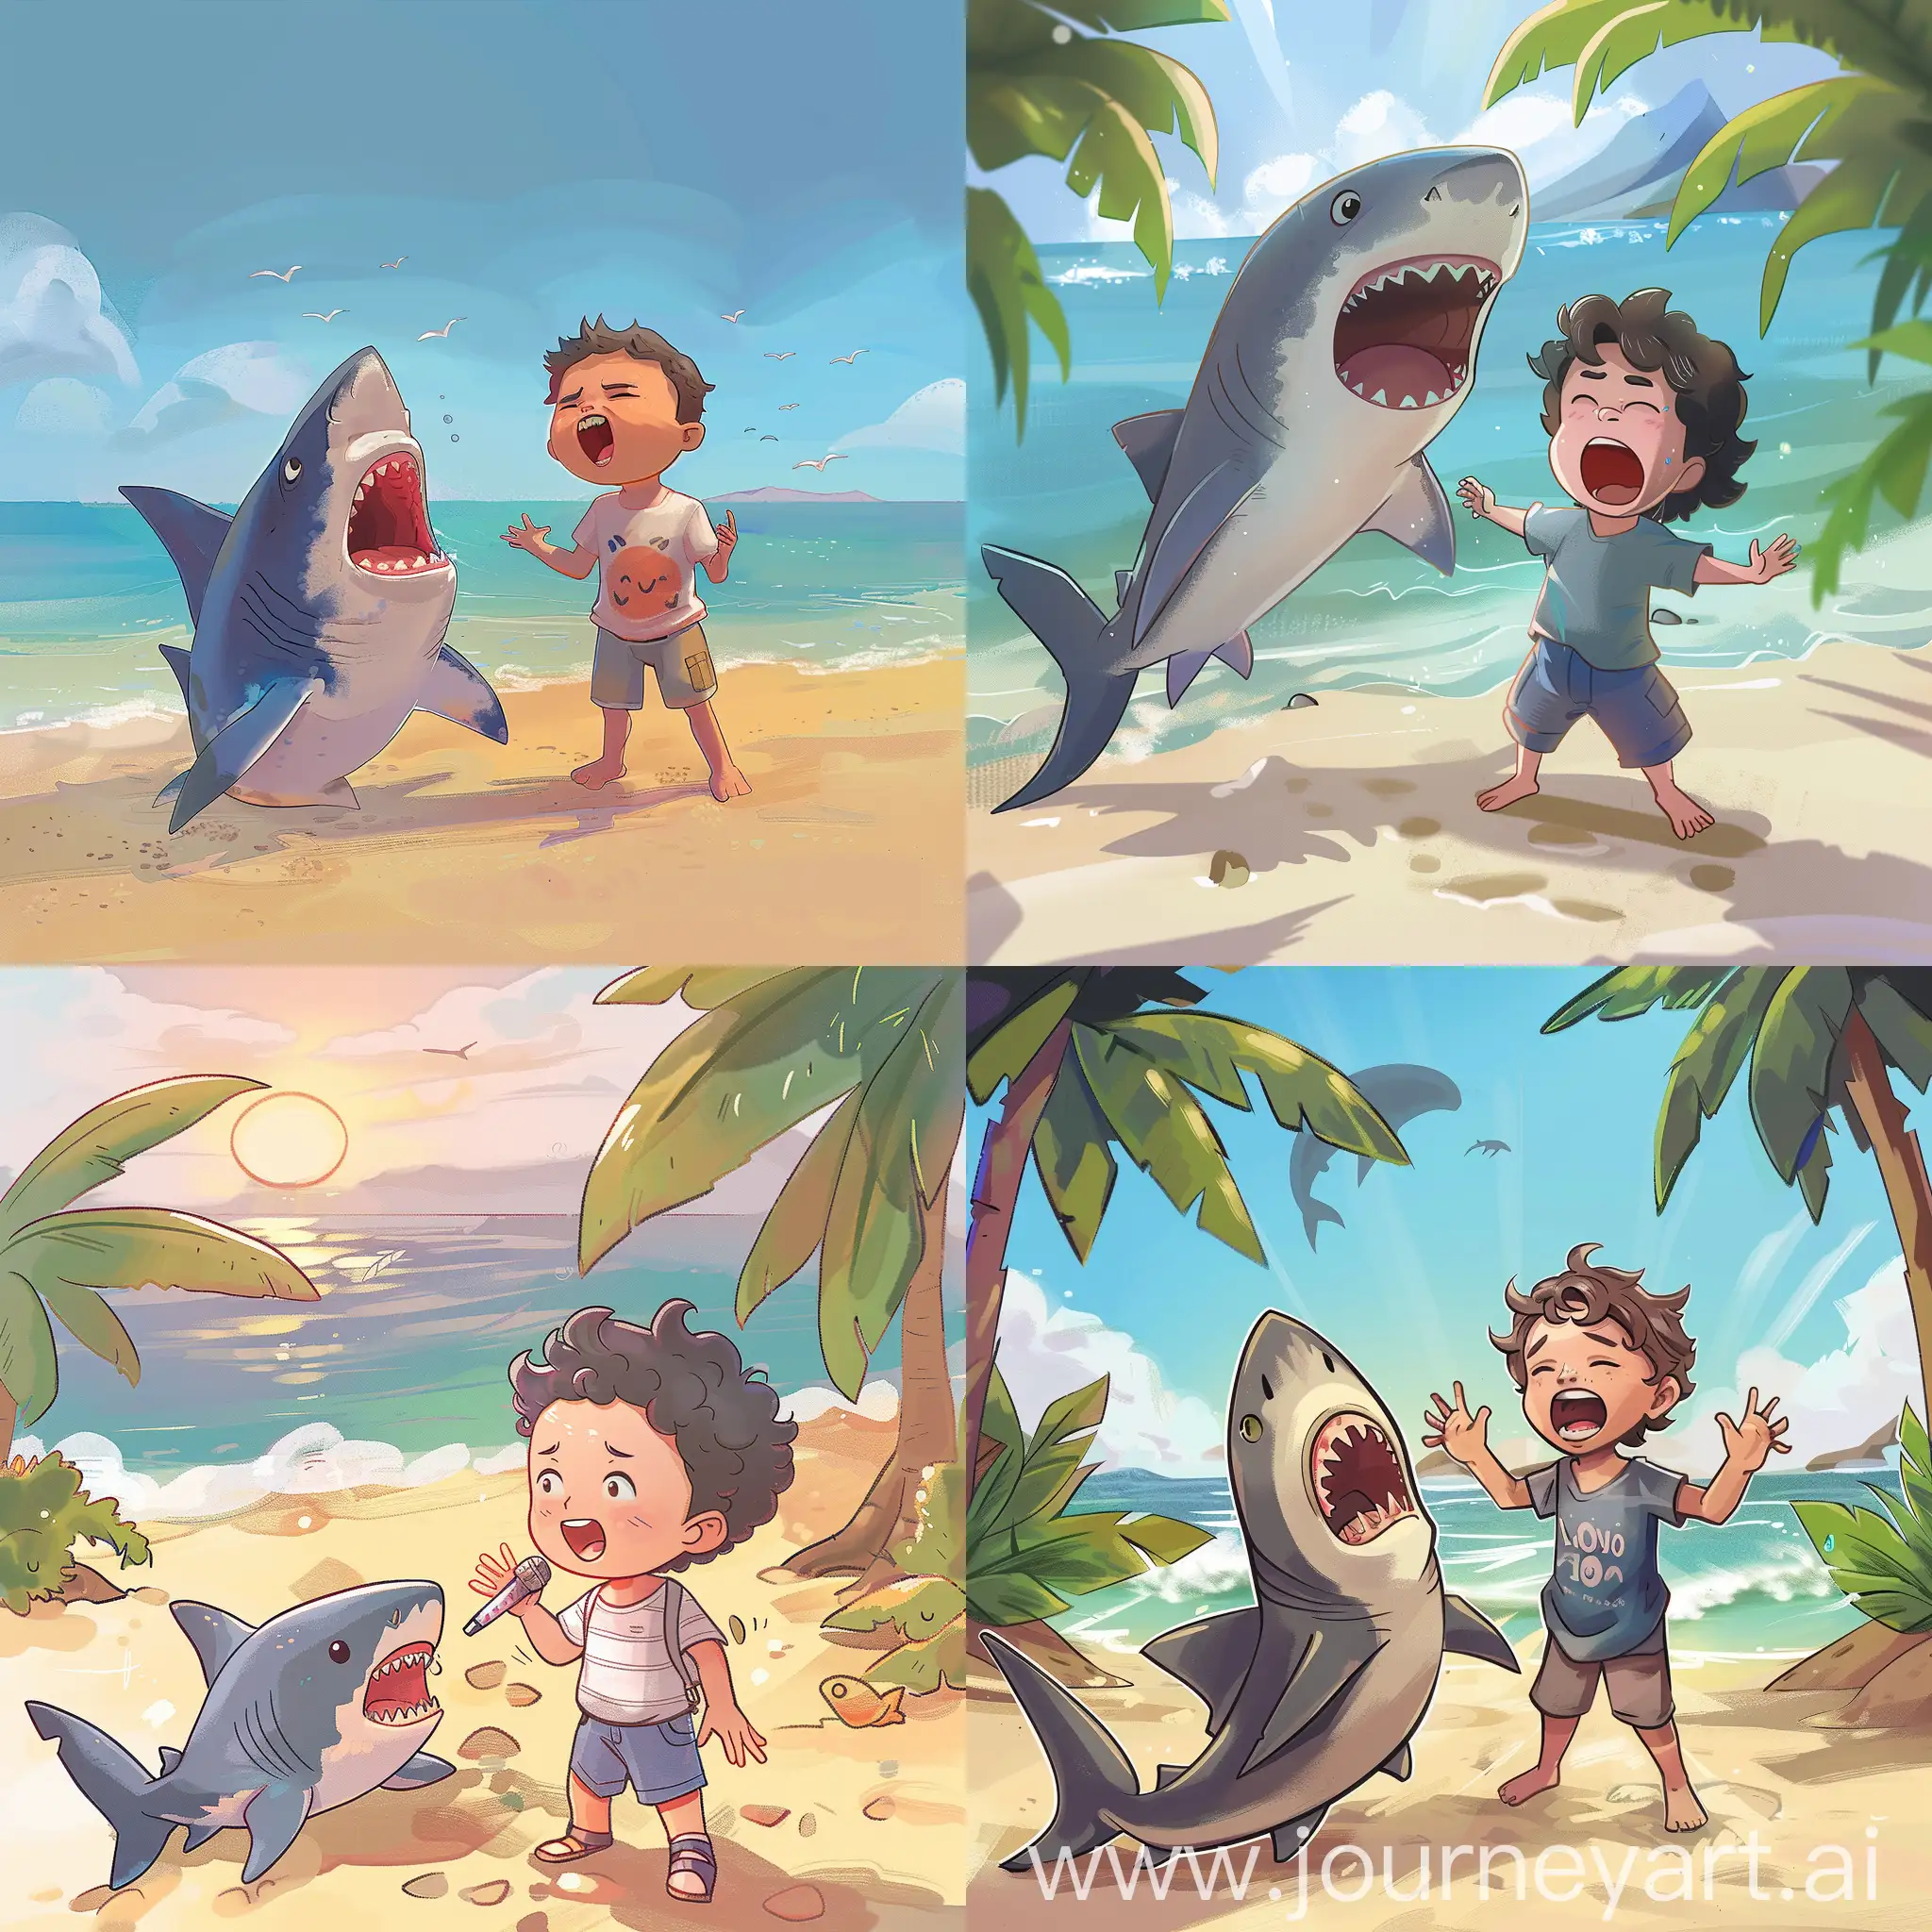 Adorable-Boy-Singing-with-a-Friendly-Shark-on-the-Beach